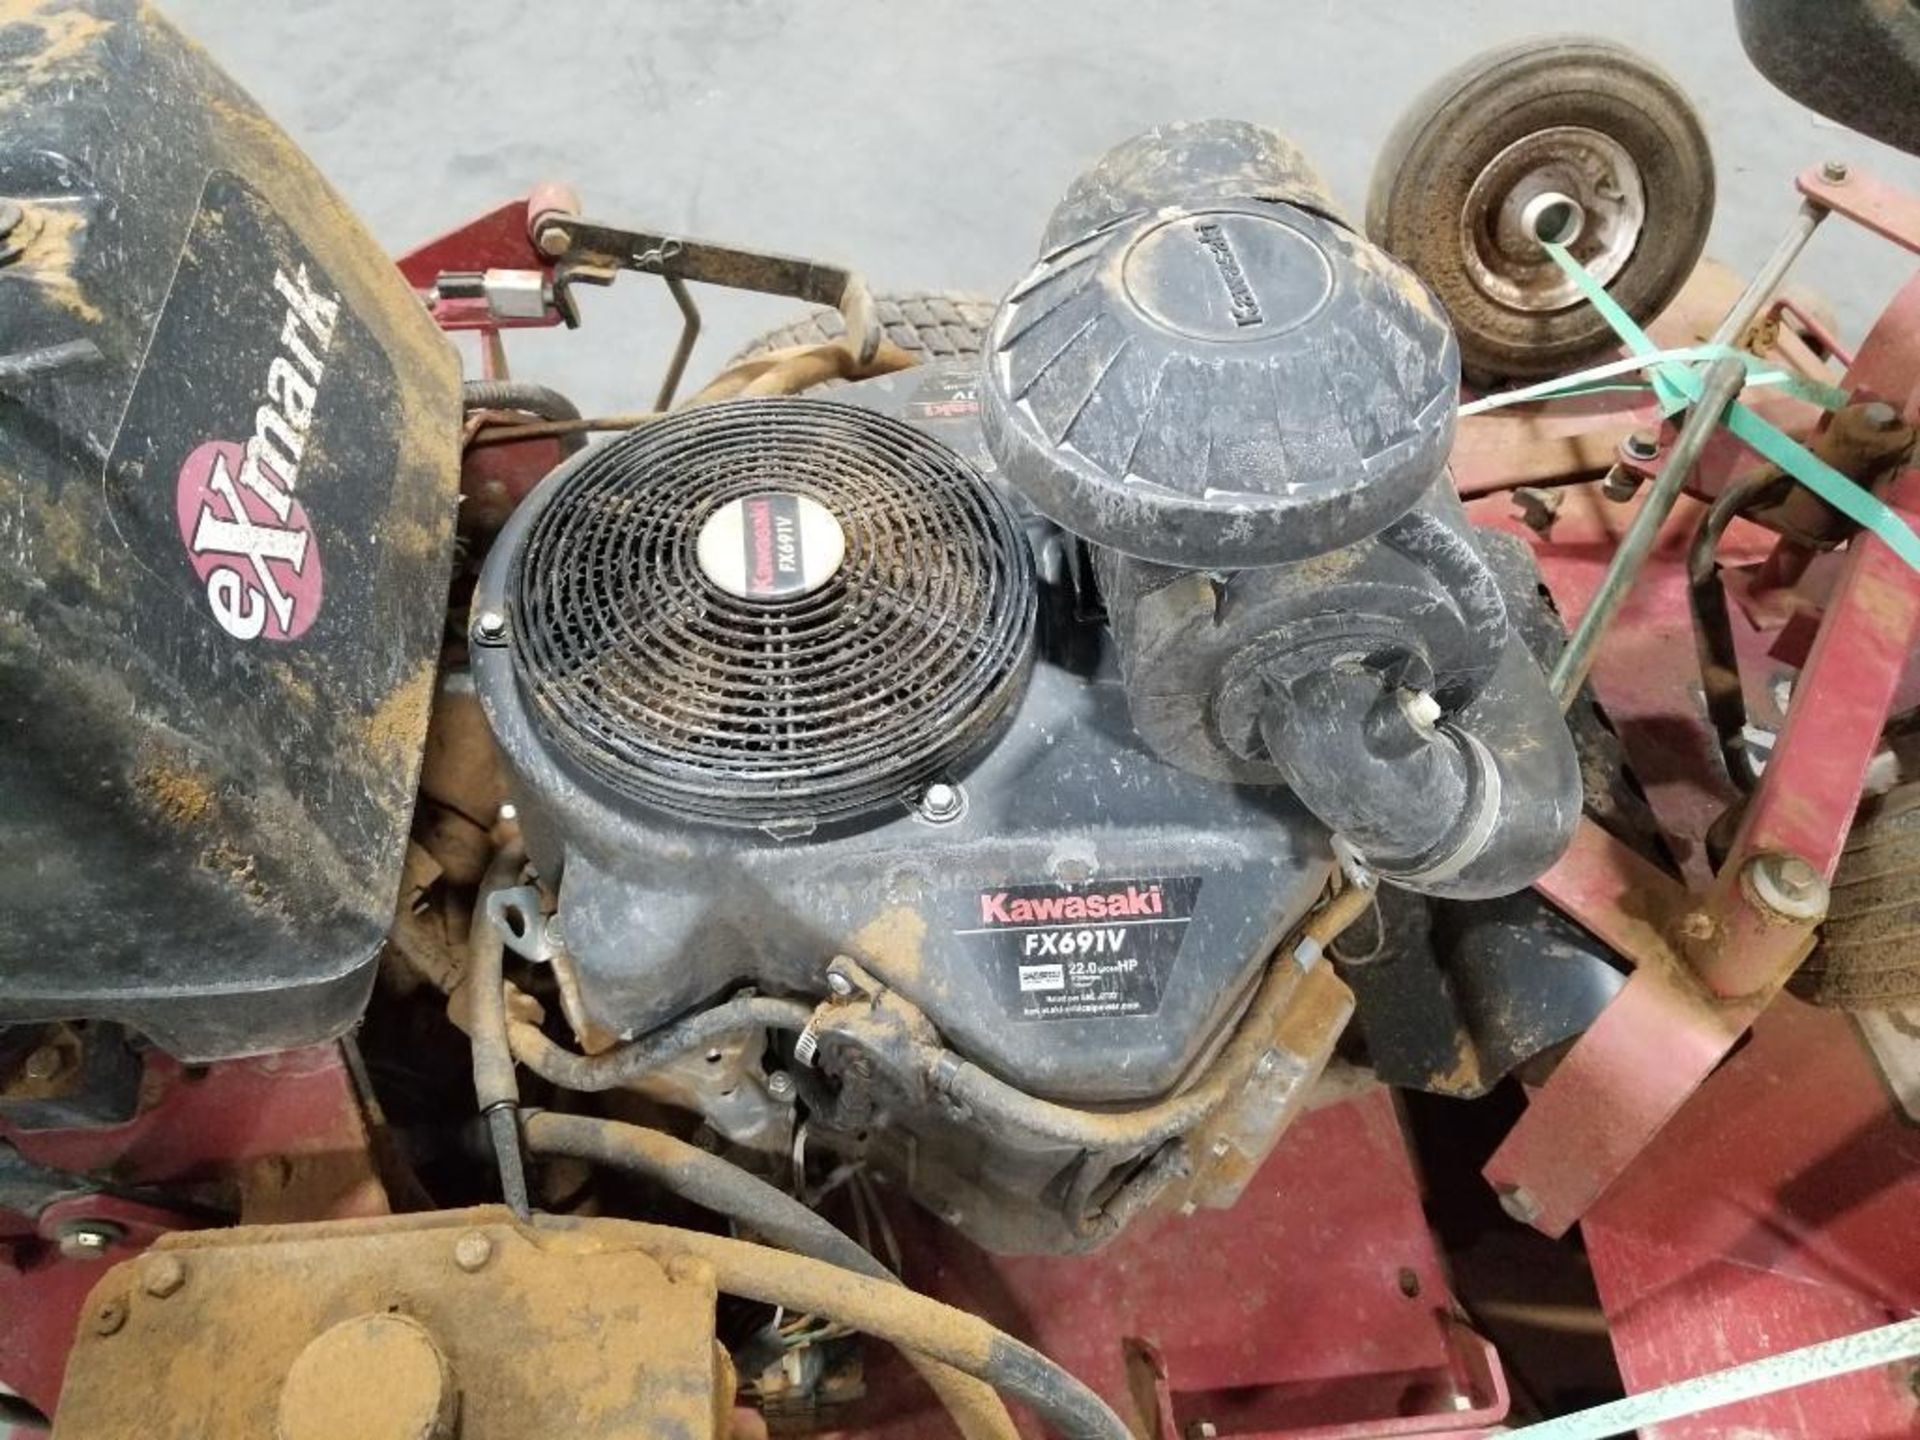 60in Exmark walk behind mower. Kawasaki 22hp engine. Working condition unknown. Battery is dead. - Image 4 of 20